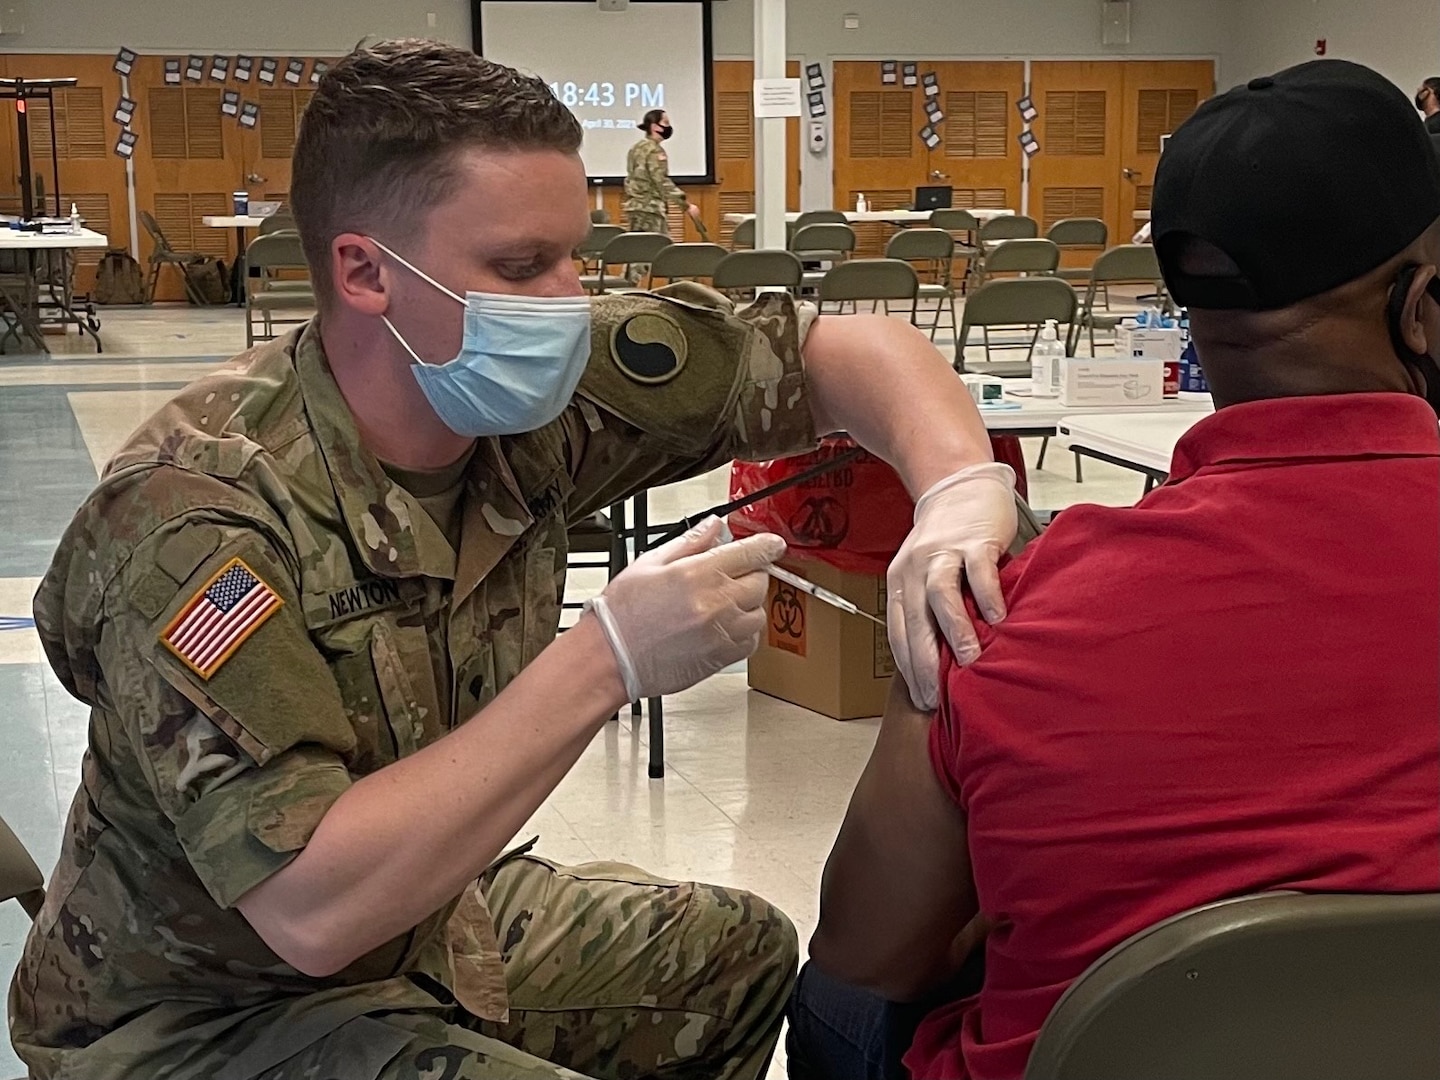 A Virginia National Guard Soldier administers a COVID-19 vaccine to a citizen during a mobile vaccination clinic in Norfolk, Virginia.